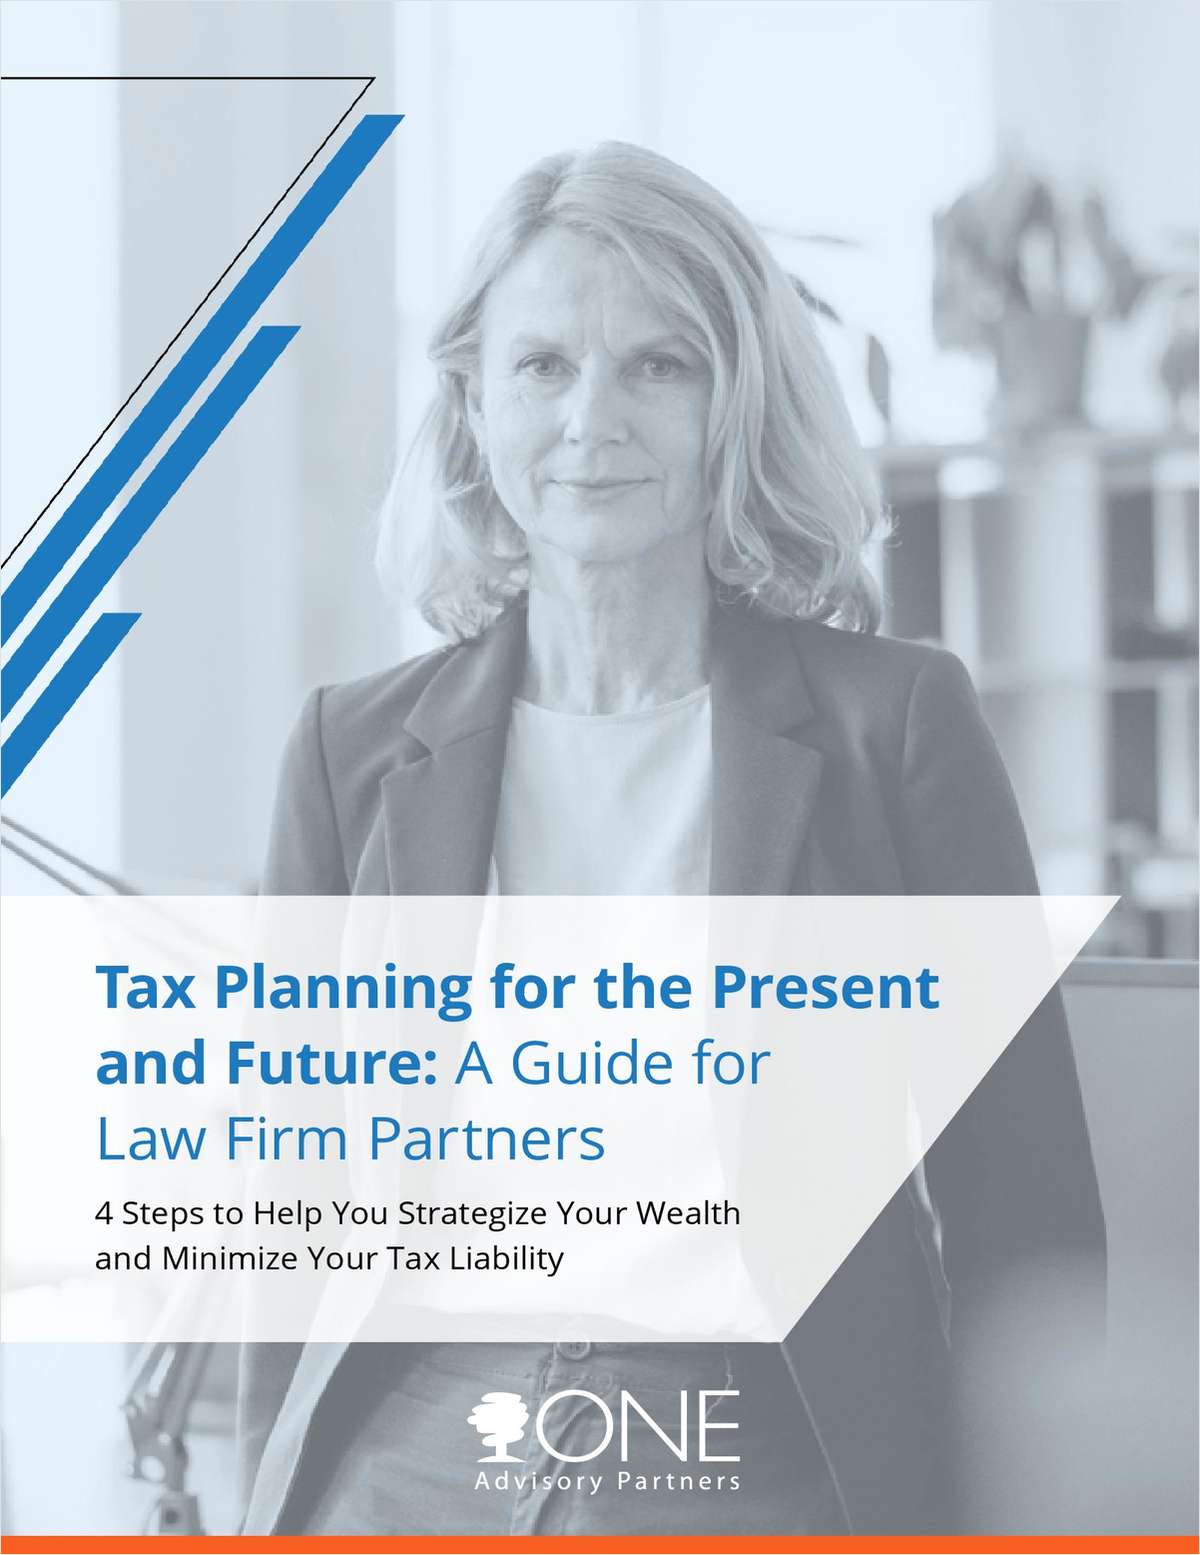 Navigating the intricate world of financial management is an additional burden for law firm partners that are already engrossed in demanding legal careers. Your financial situation is inherently complex. This guide provides 4 actionable strategies to help you increase wealth and minimize your tax liability.